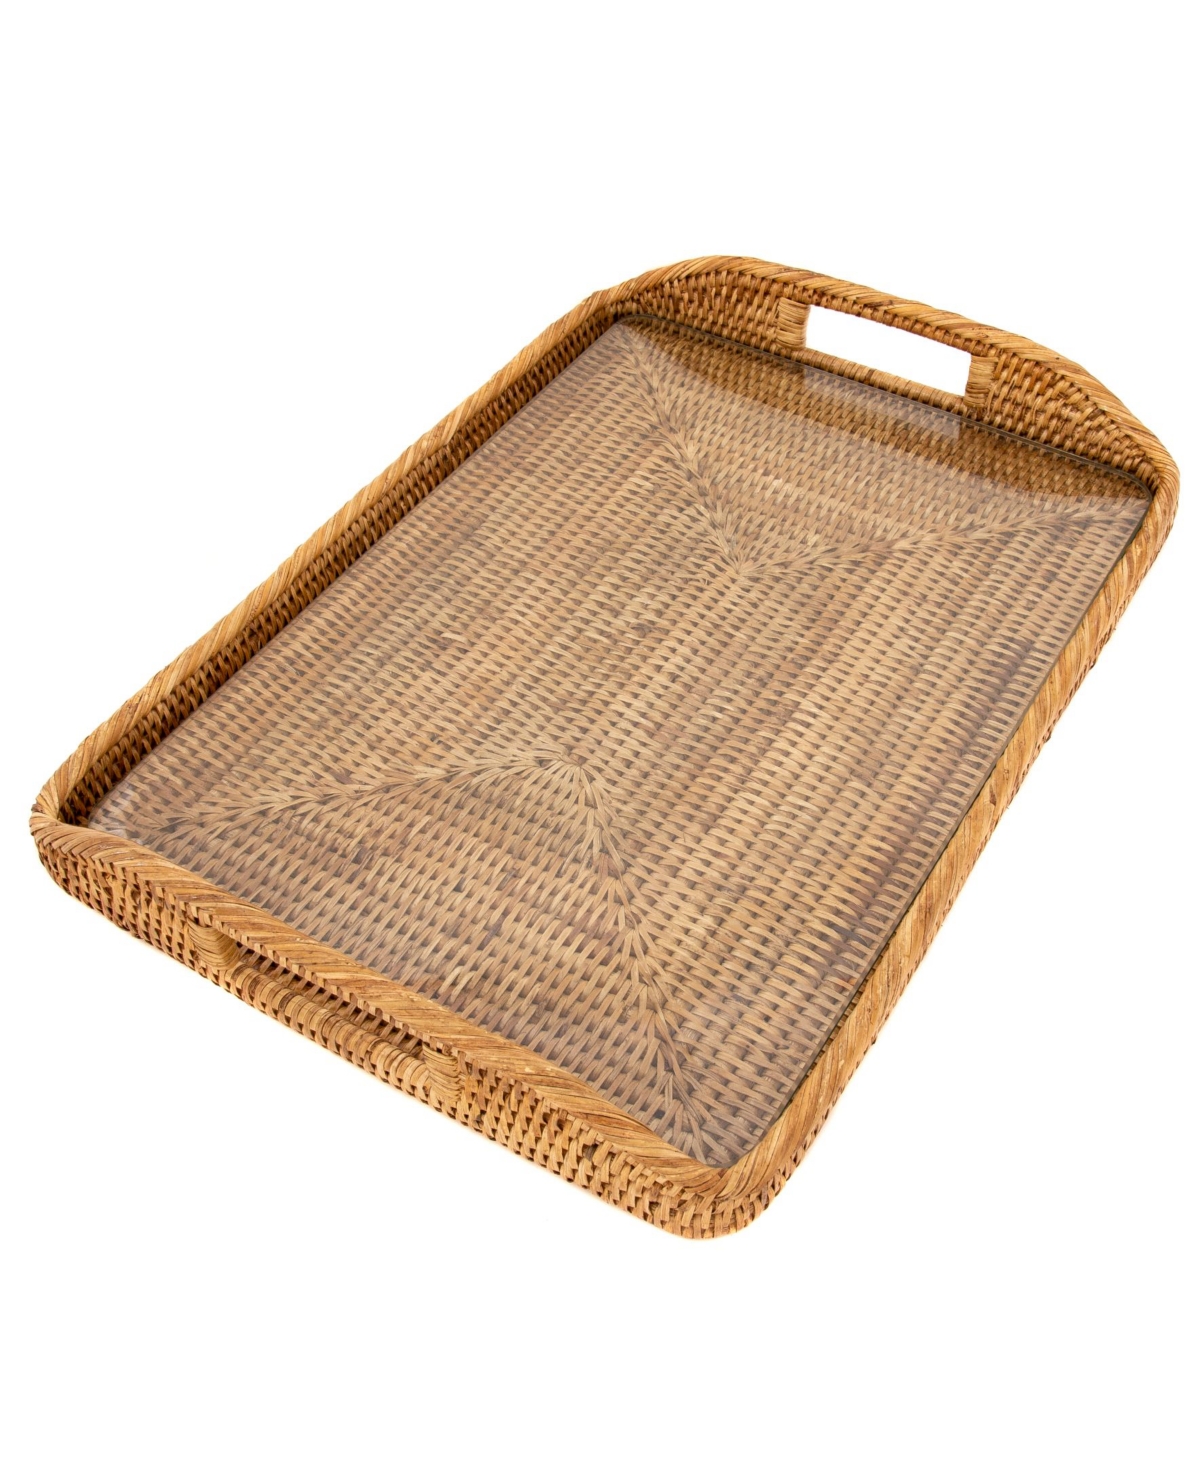 Artifacts Trading Company Artifacts Rattan 17" Rectangular Tray With Glass Insert In Medium Brown